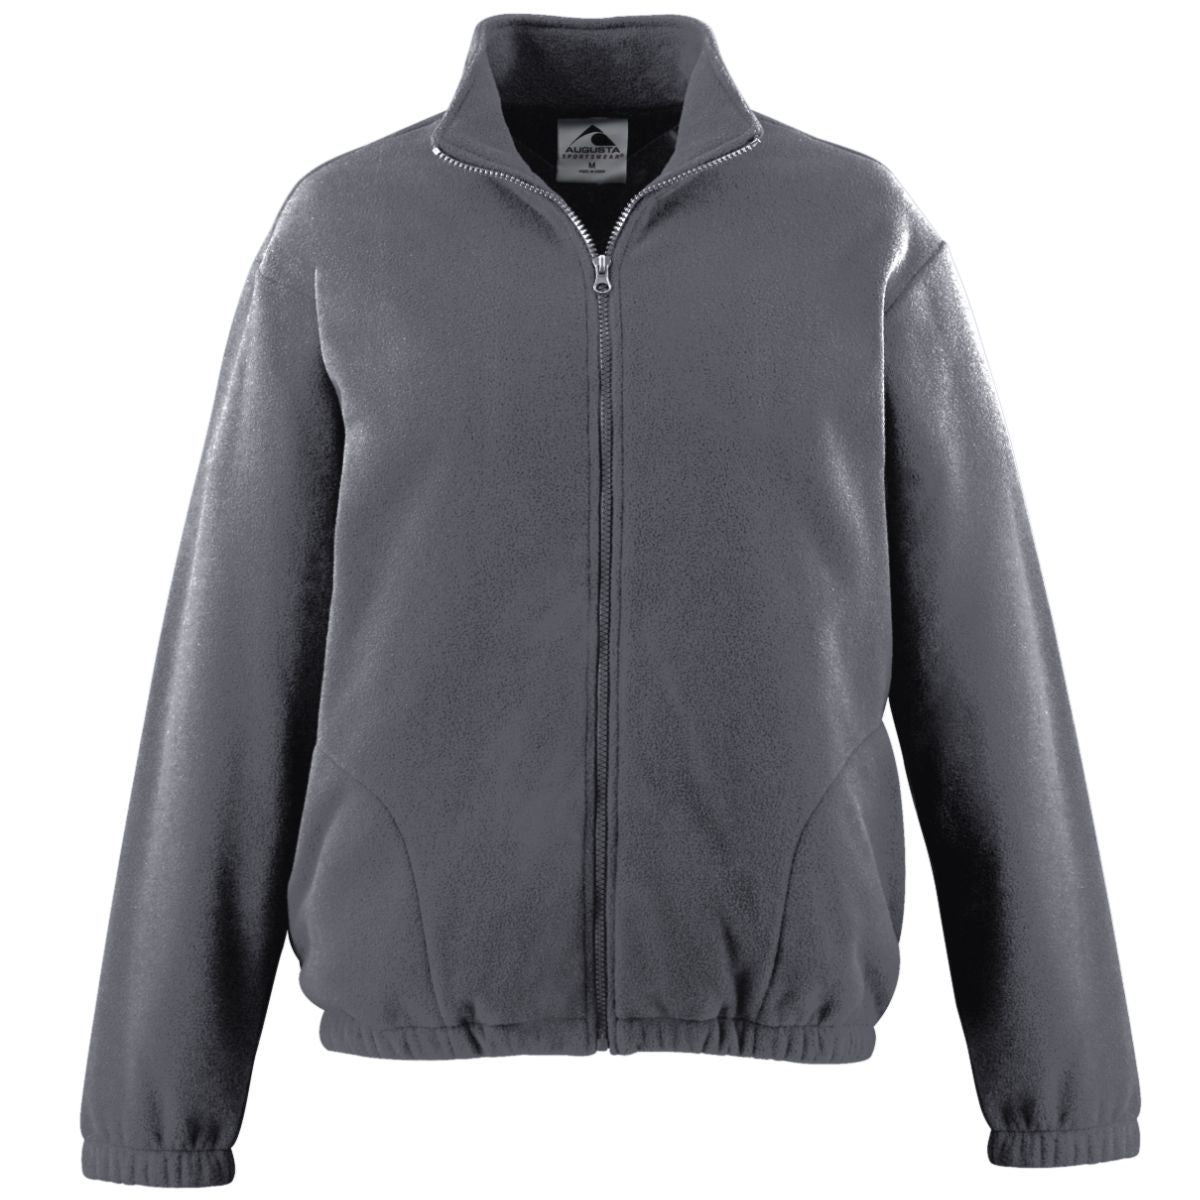 Augusta Sportswear Youth Chill Fleece Full Zip Jacket in Charcoal Heather  -Part of the Youth, Youth-Jacket, Augusta-Products, Outerwear product lines at KanaleyCreations.com